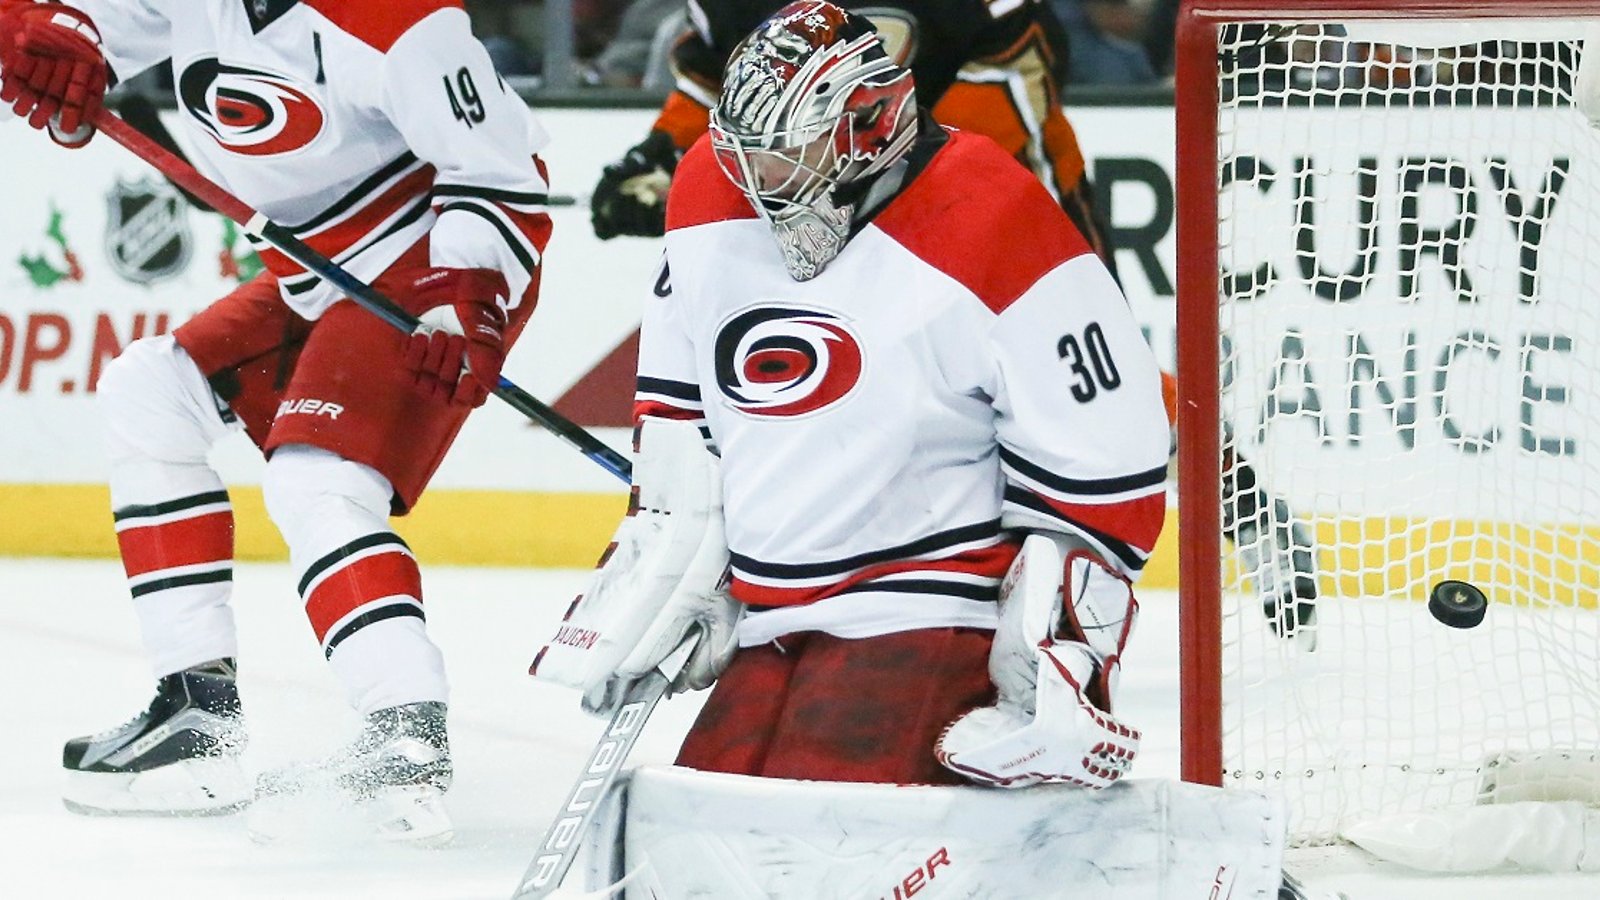 More trouble for the Carolina Hurricanes after cancelling last night's game.